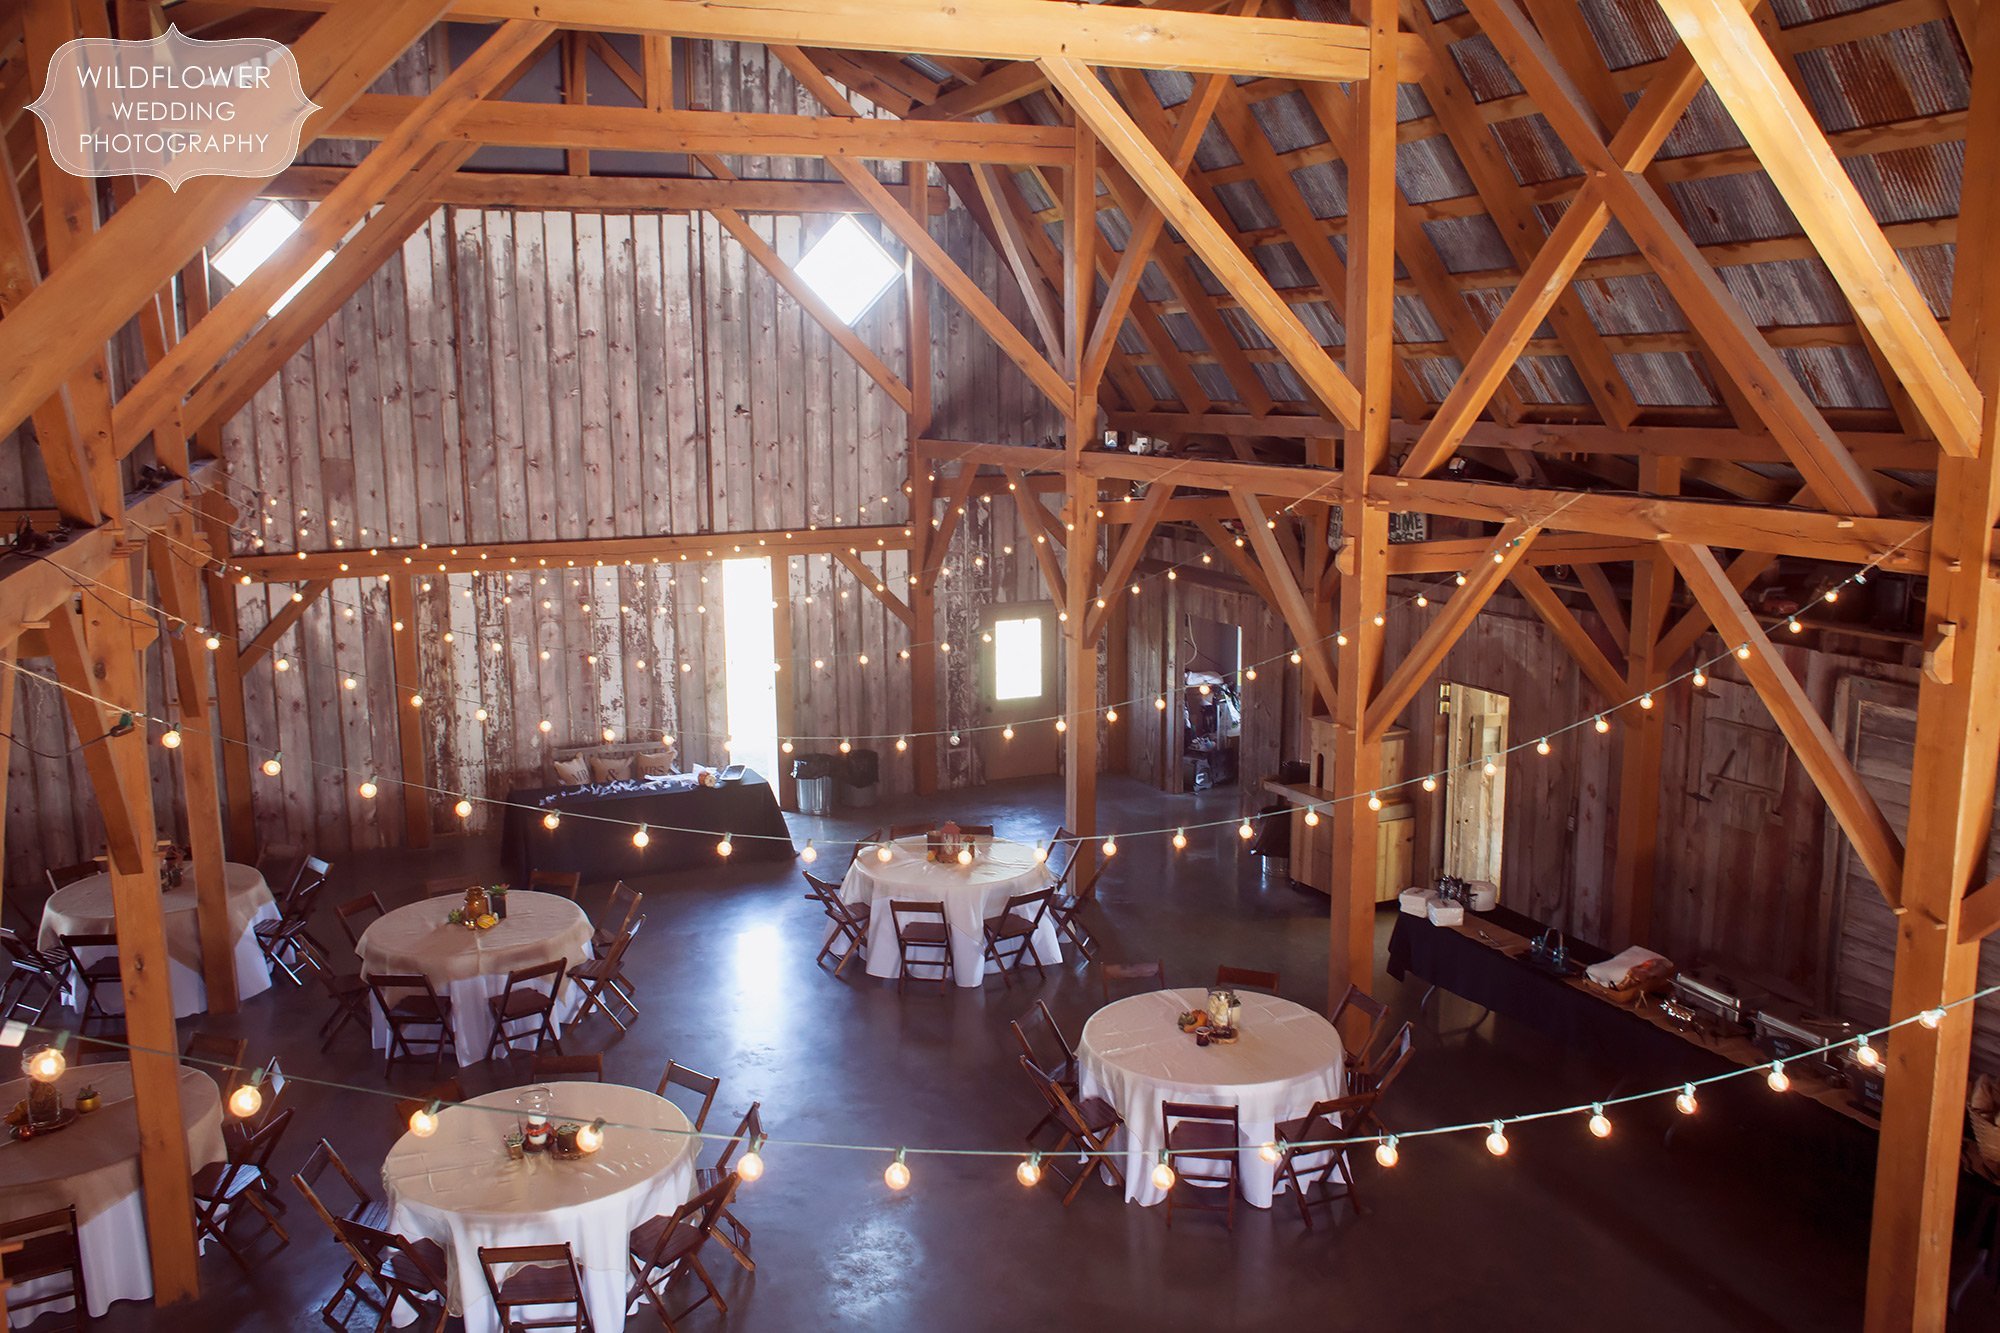 View of the inside of the timber frame barn at the Schwinn Produce Farm with dinner tables set up and cafe string lights above.